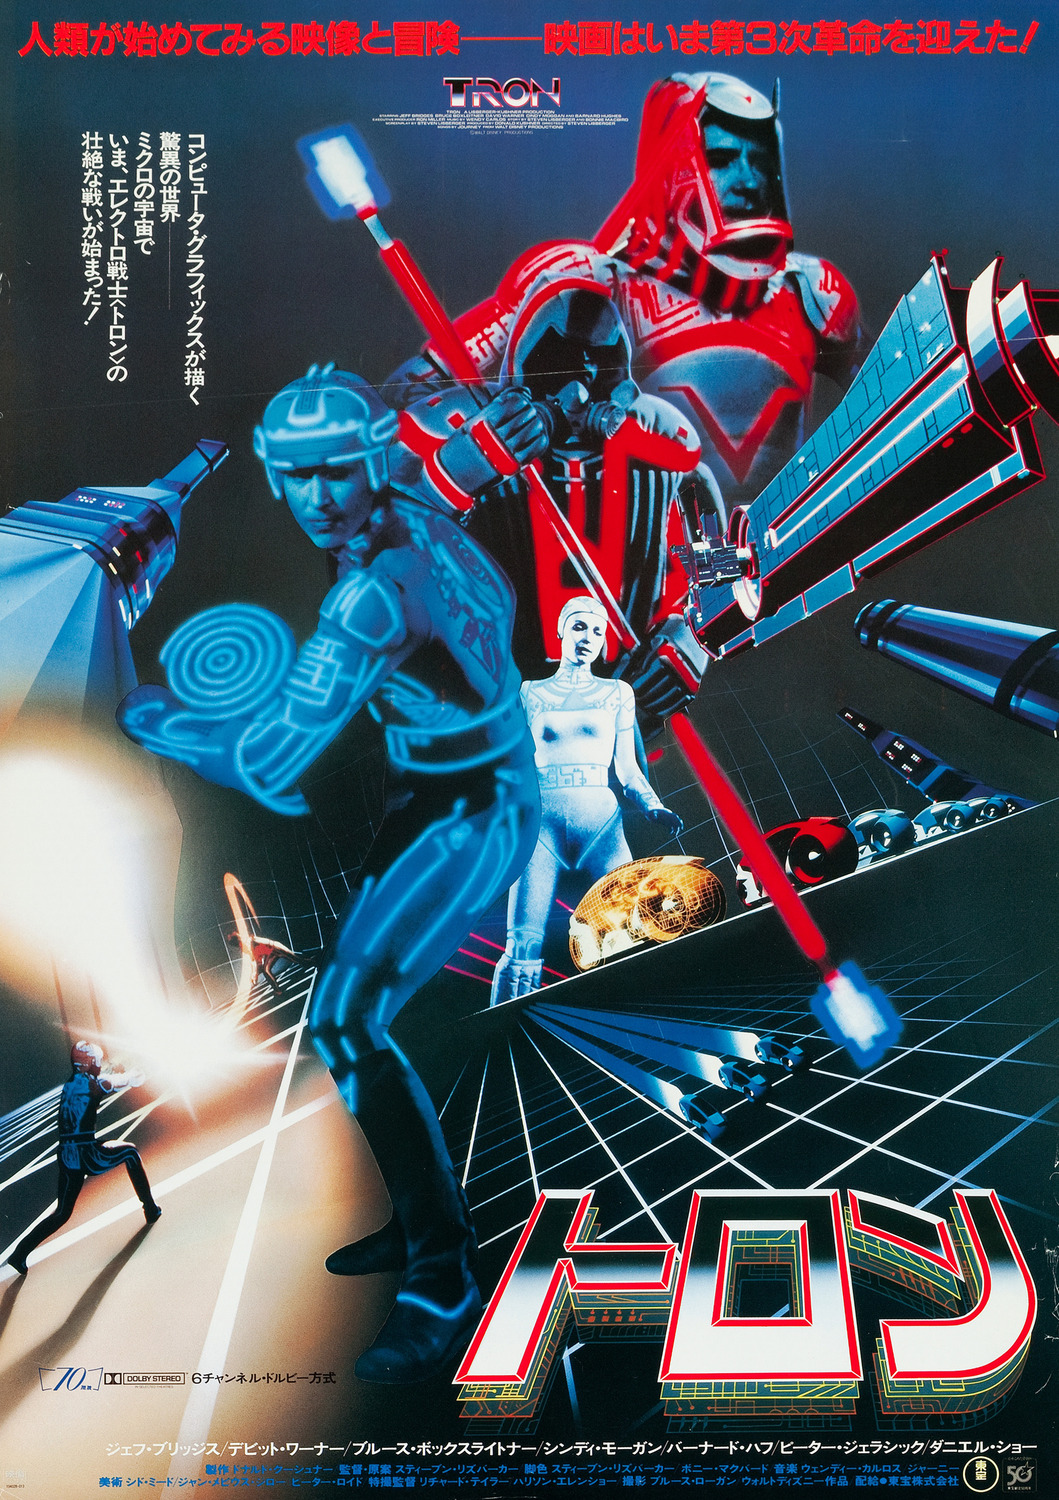 Extra Large Movie Poster Image for Tron (#4 of 5)